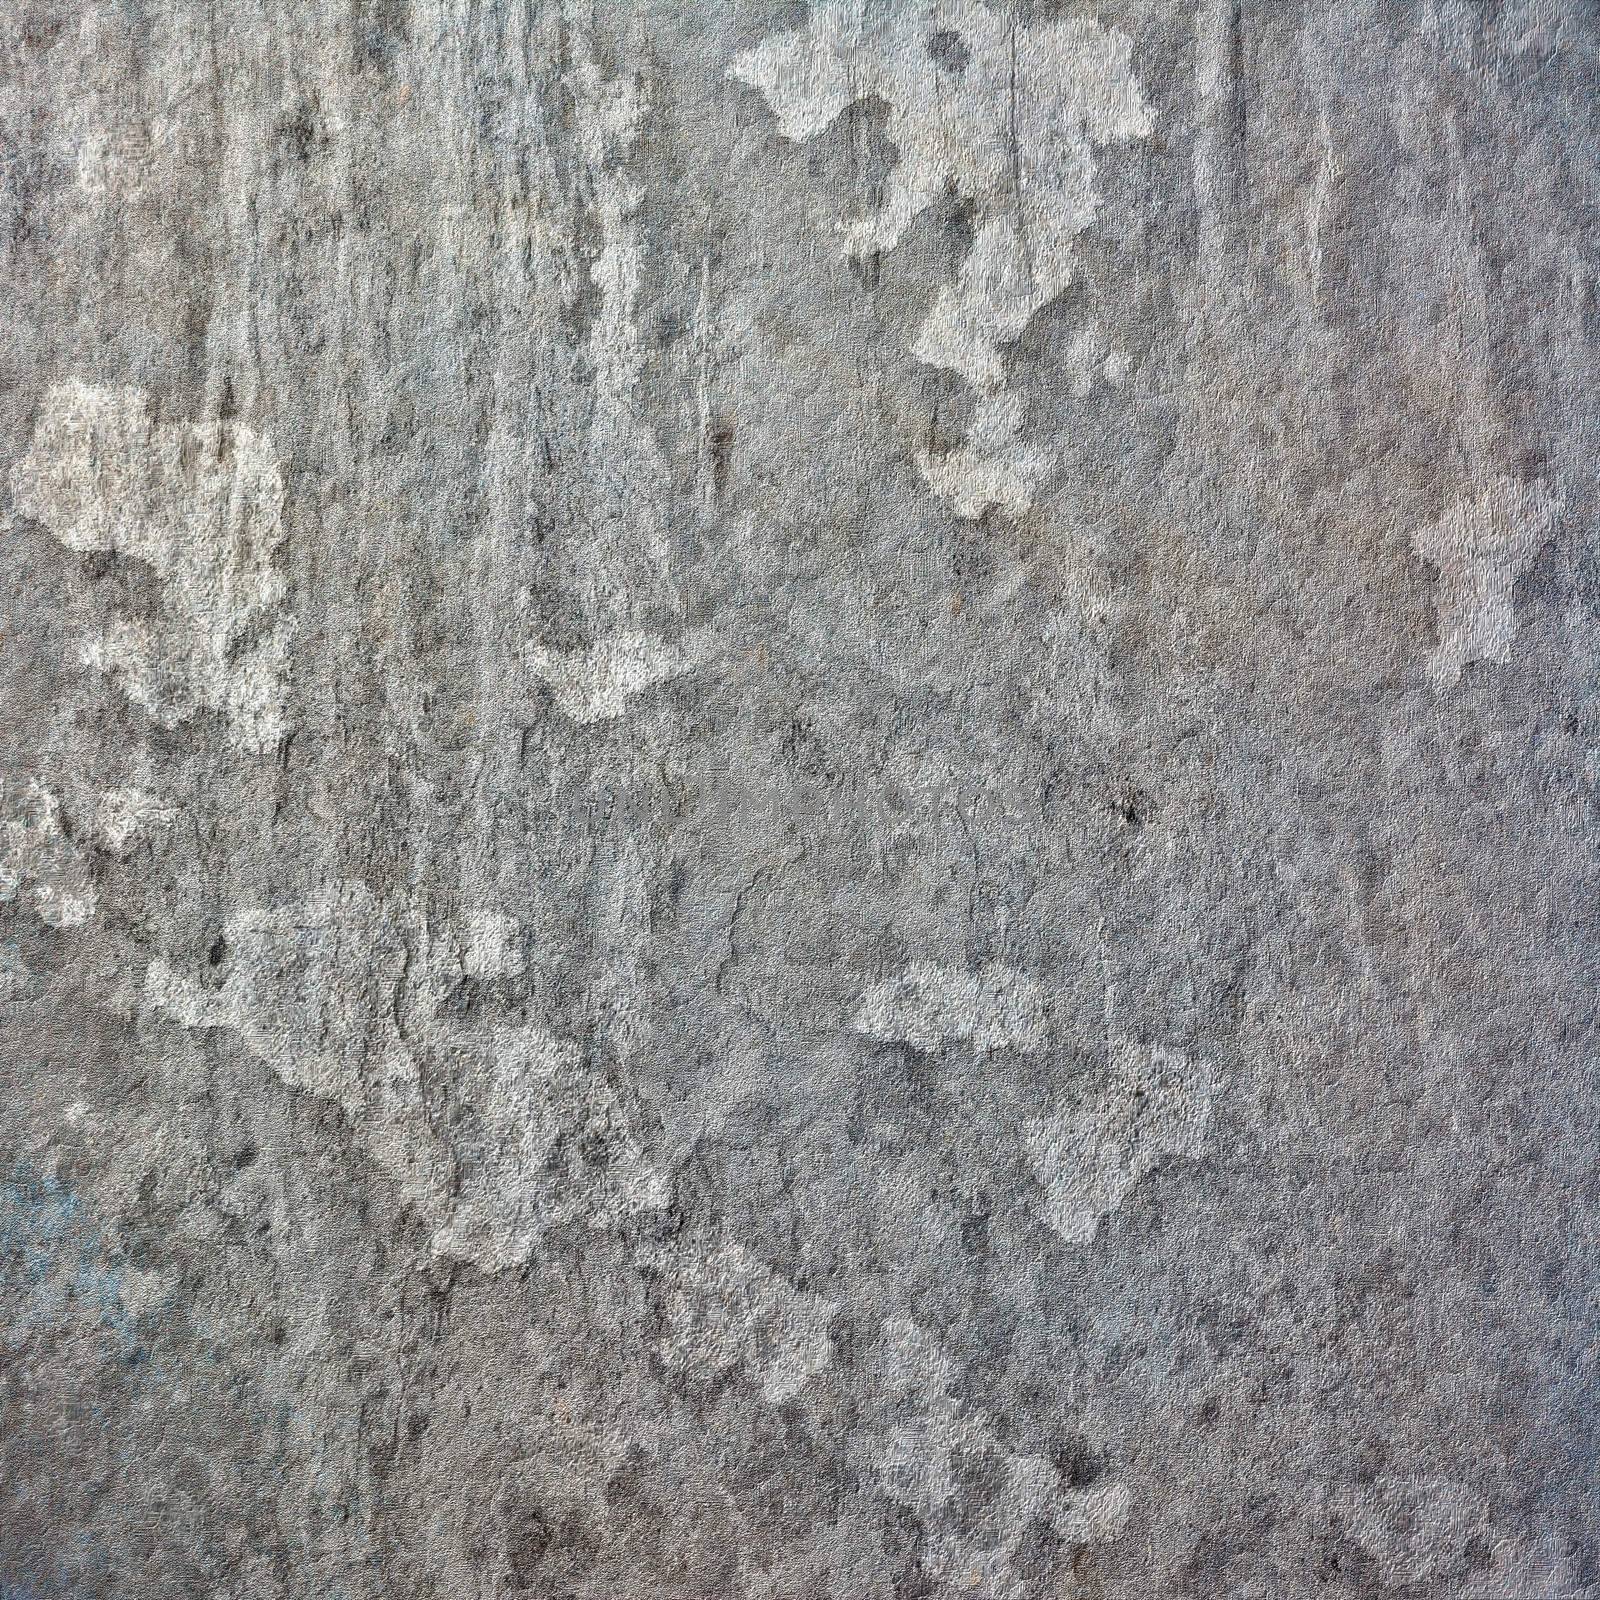 Texture of grunge interior, old dirty wall.